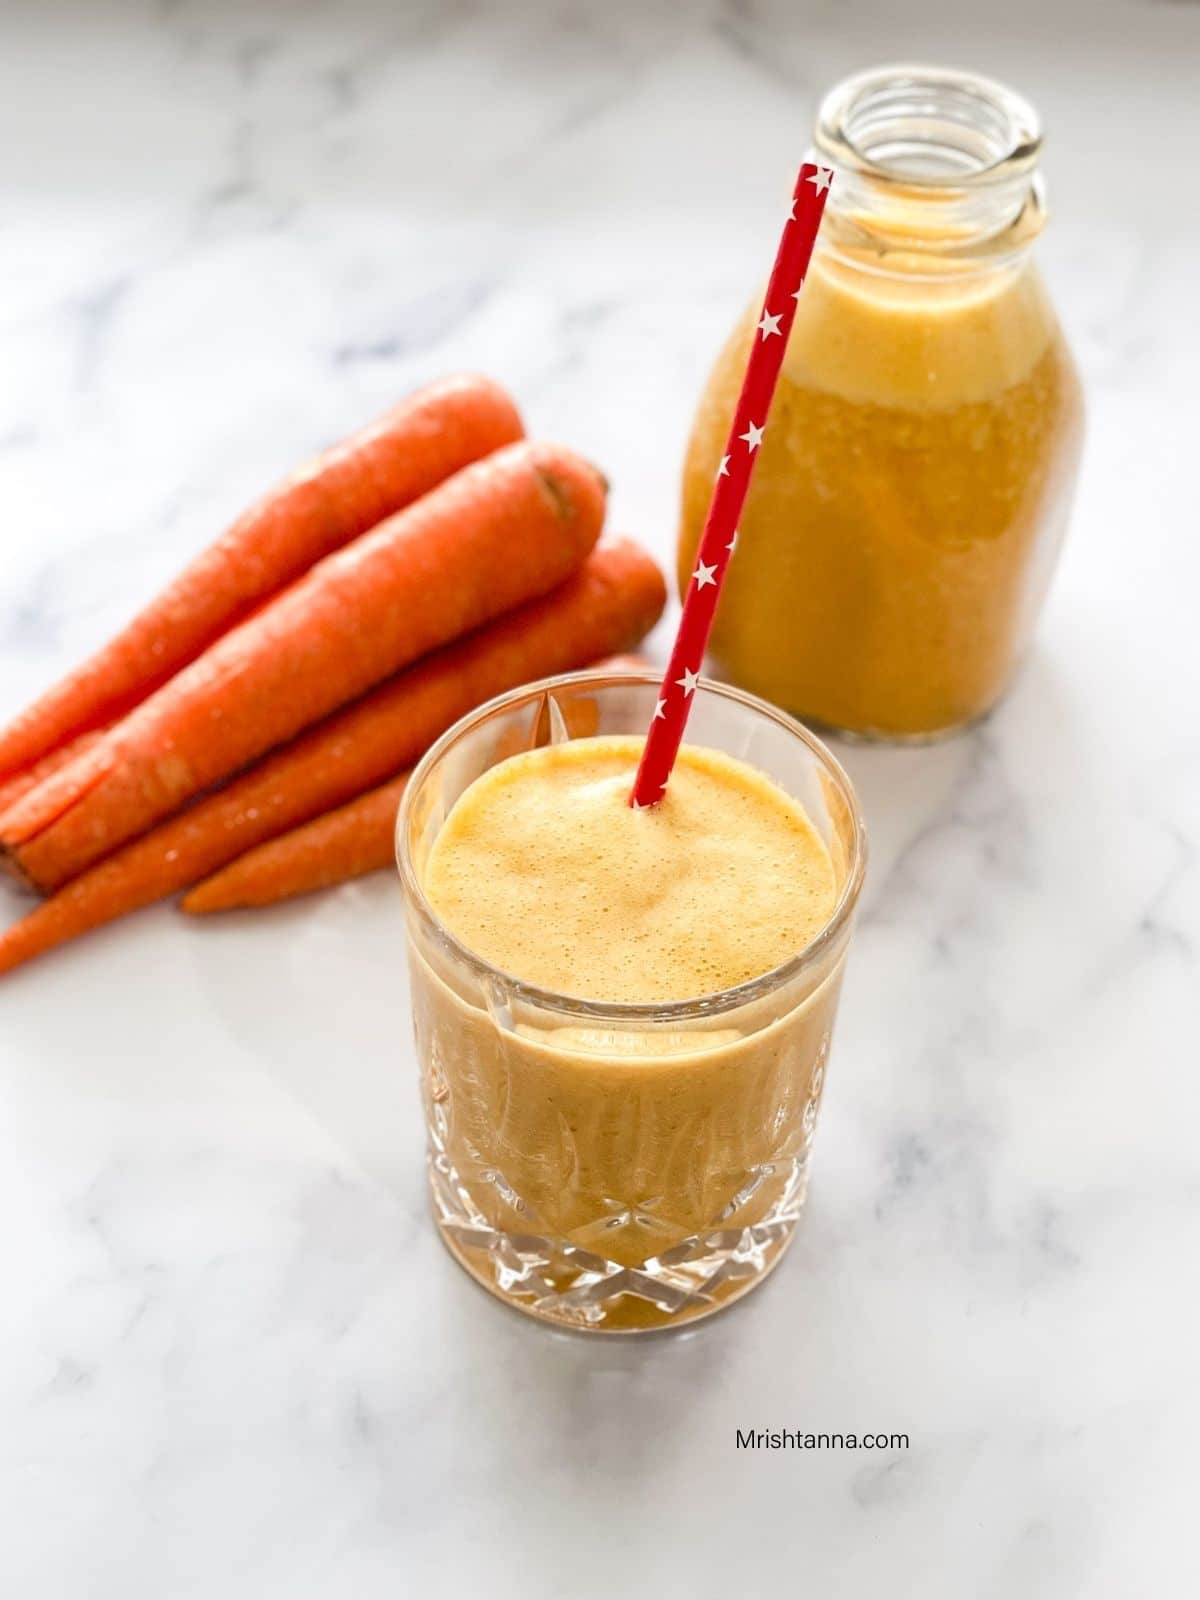 A glass is filled with carrot milkshake and a straw is inserted inside the glass